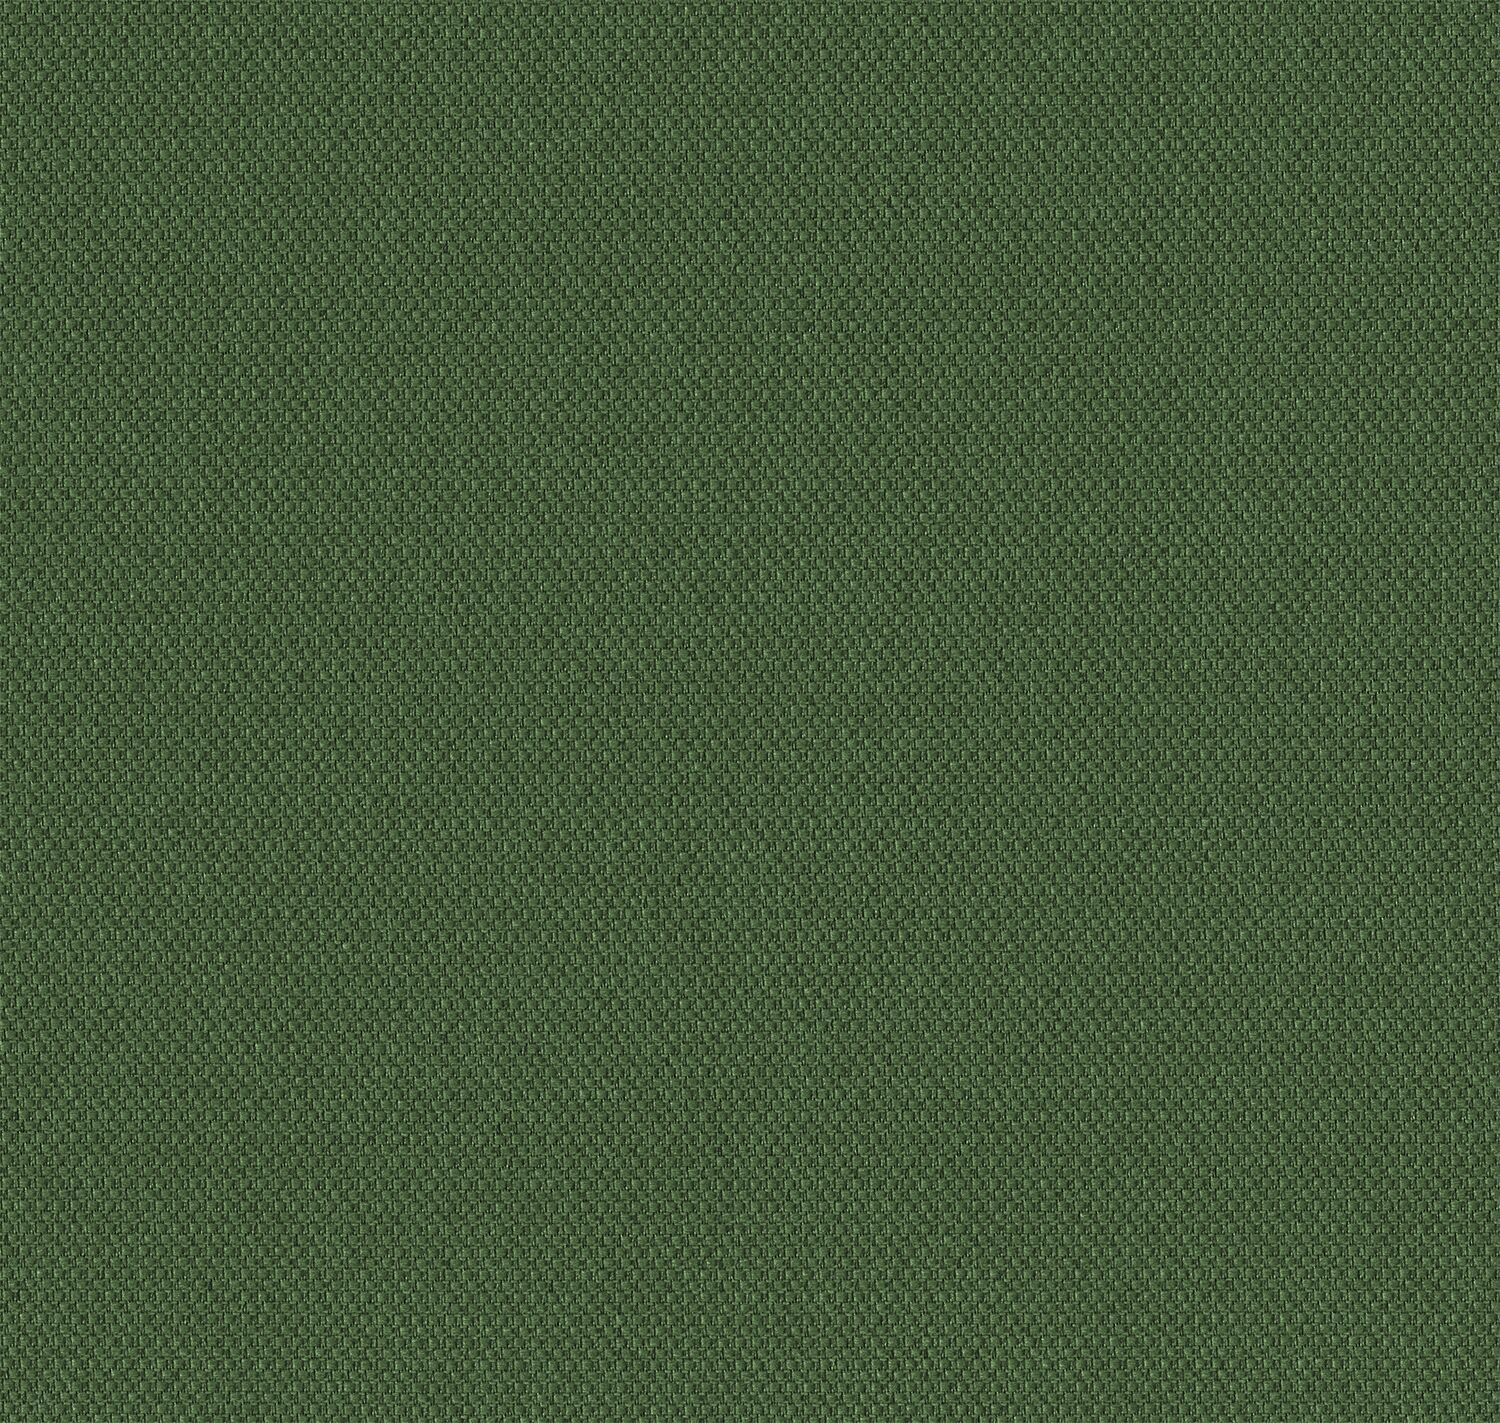 Biotope - Grasslands - 4113 - 15 - Half Yard Tileable Swatches